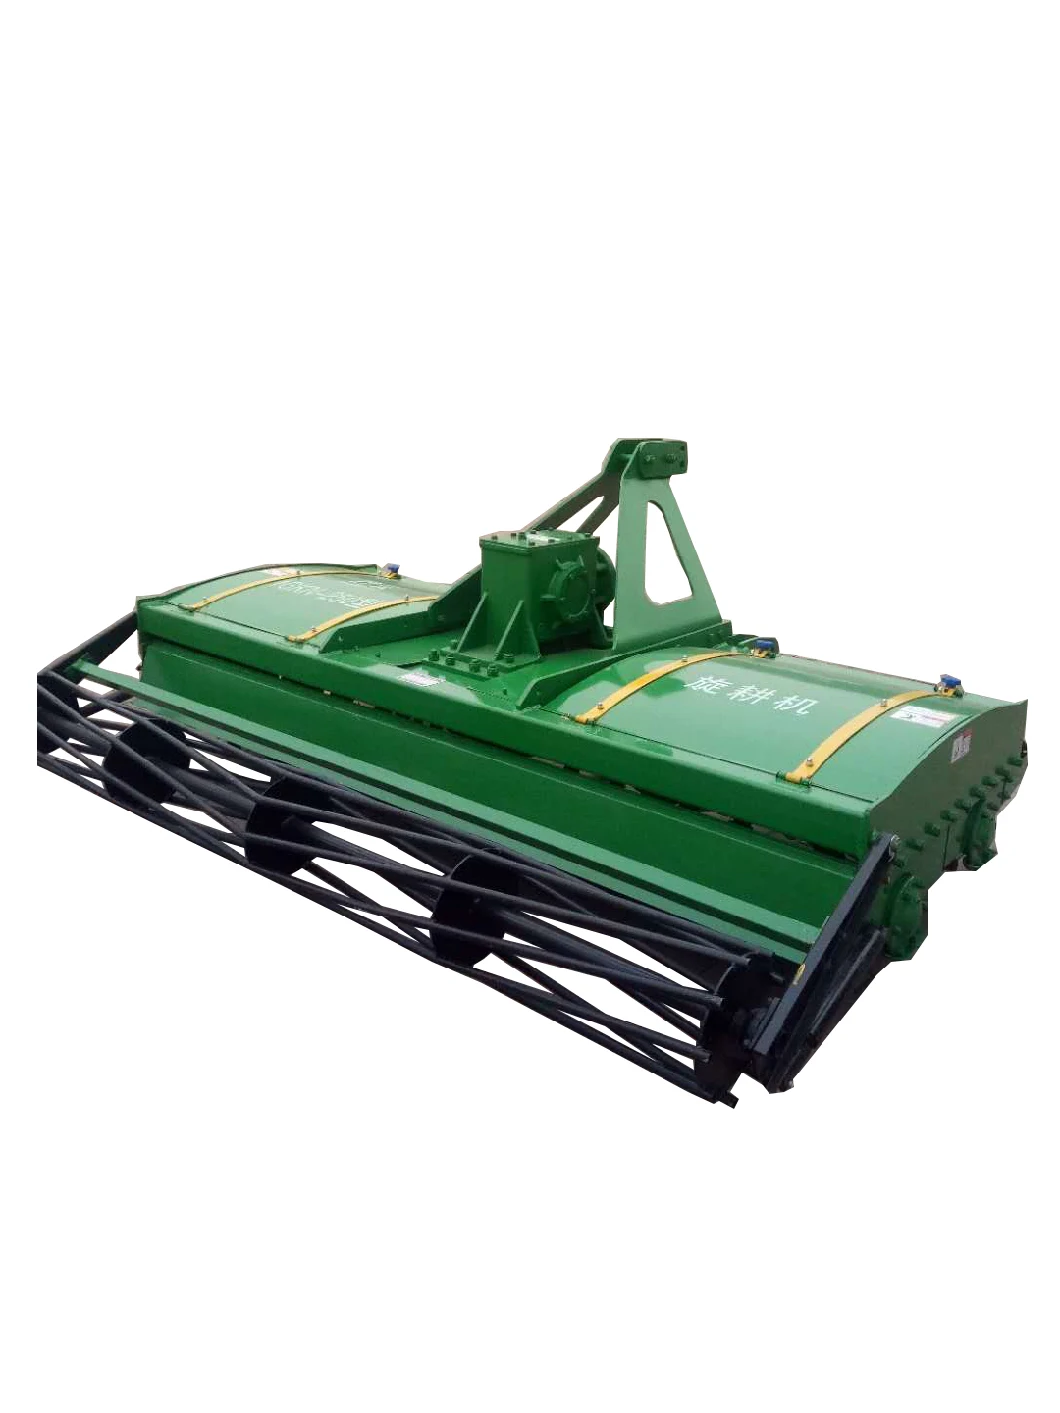 Double Shaft Ripper Large Box Rotary Tiller Broadsword Rotary Tiller Rear Suspension Ripper Broadsword Rotary Tiller